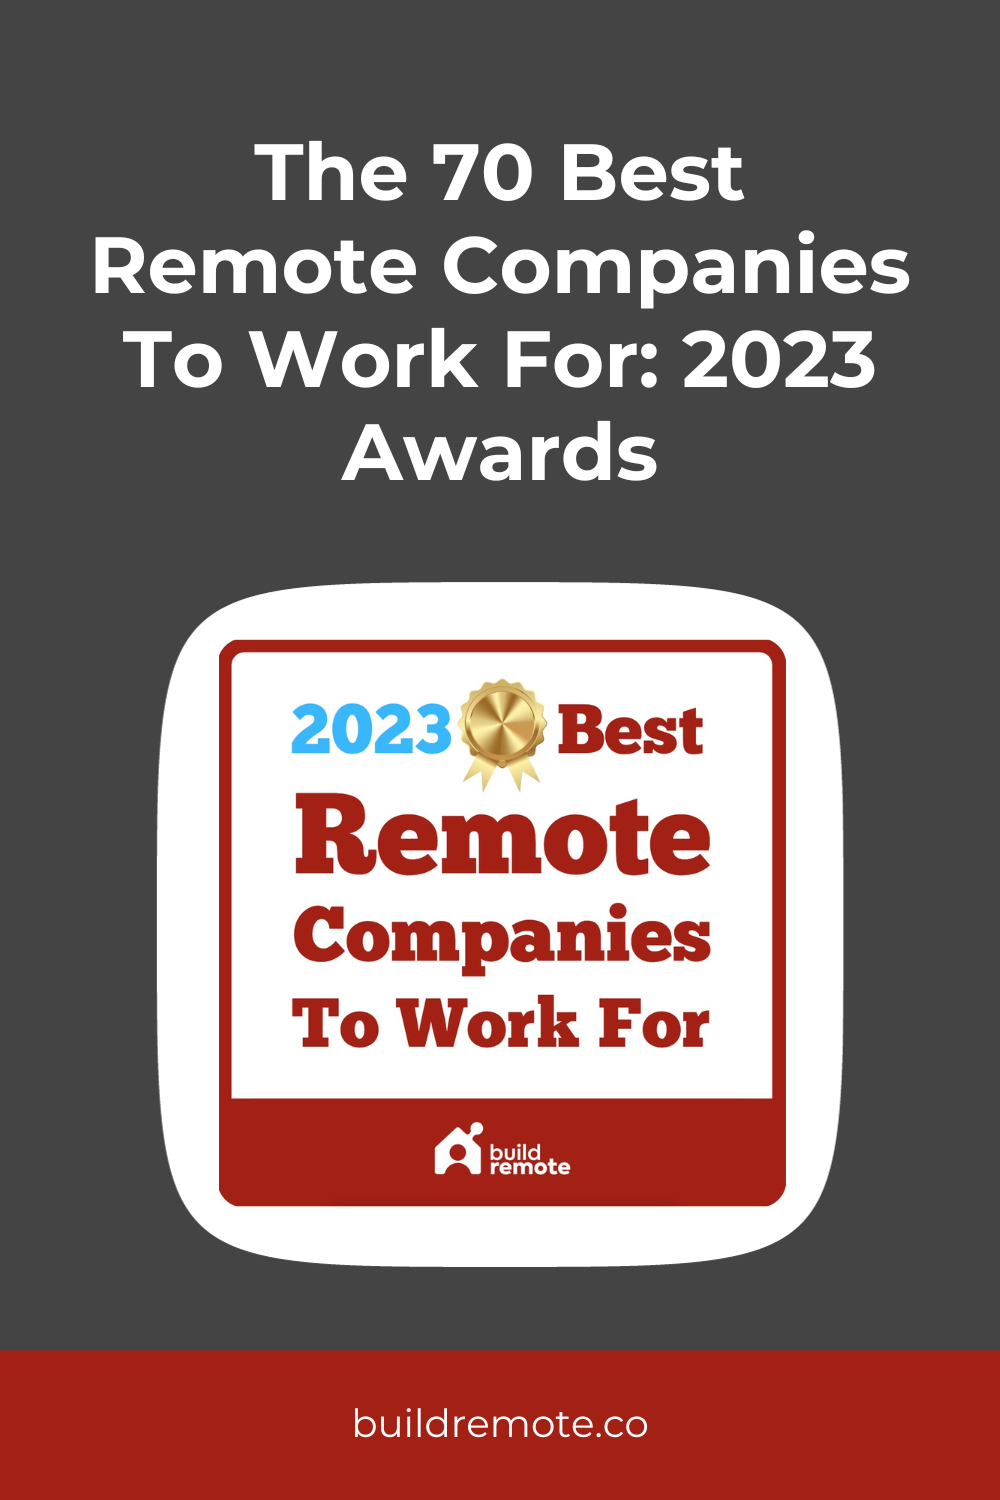 Pinterest Image - The 70 Best Remote Companies To Work For: 2023 Awards